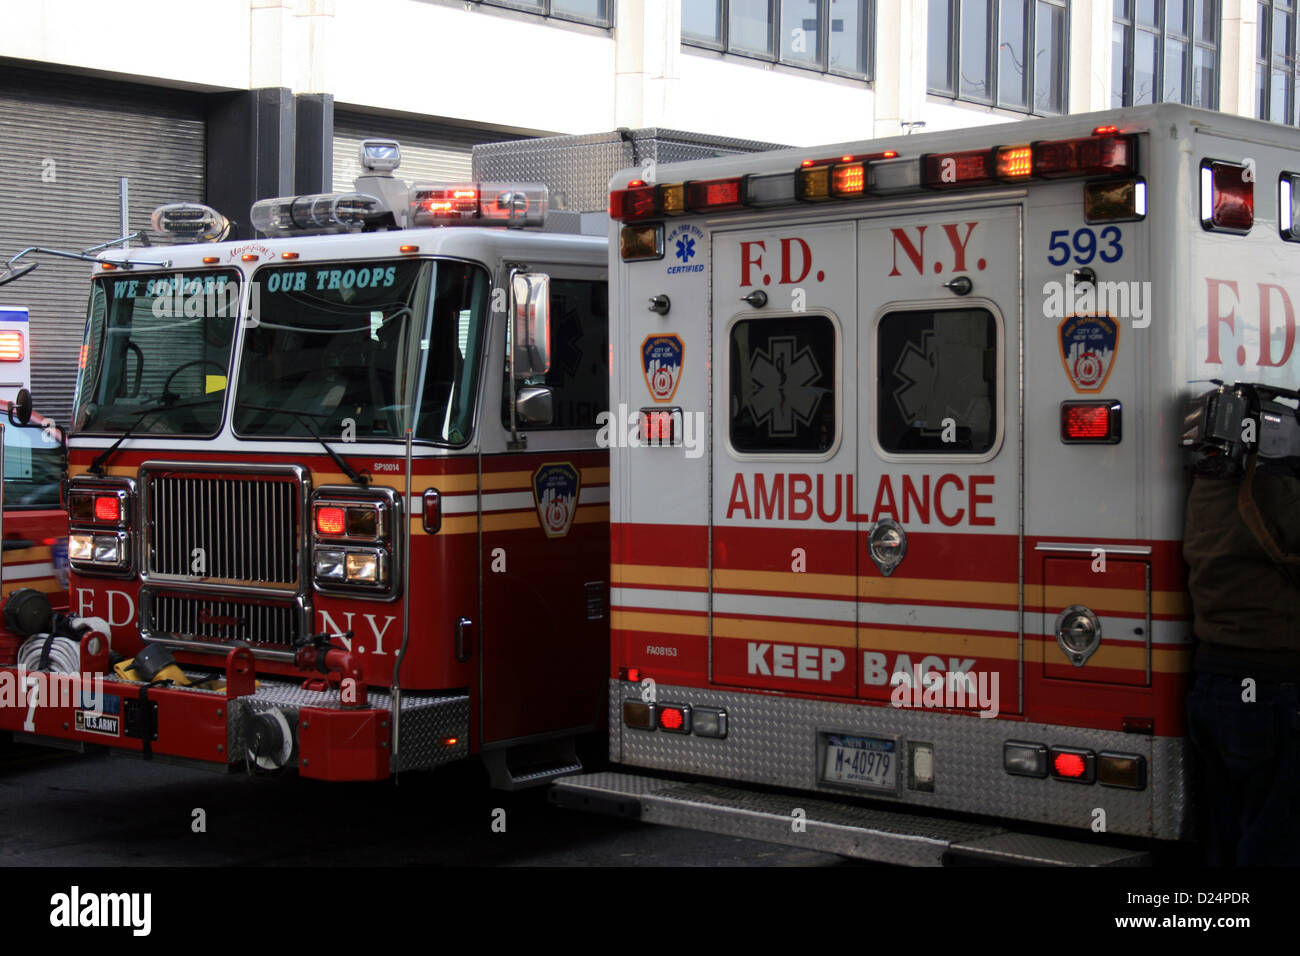 FDNY Emergency response vehicles at the scene of an accident. Stock Photo